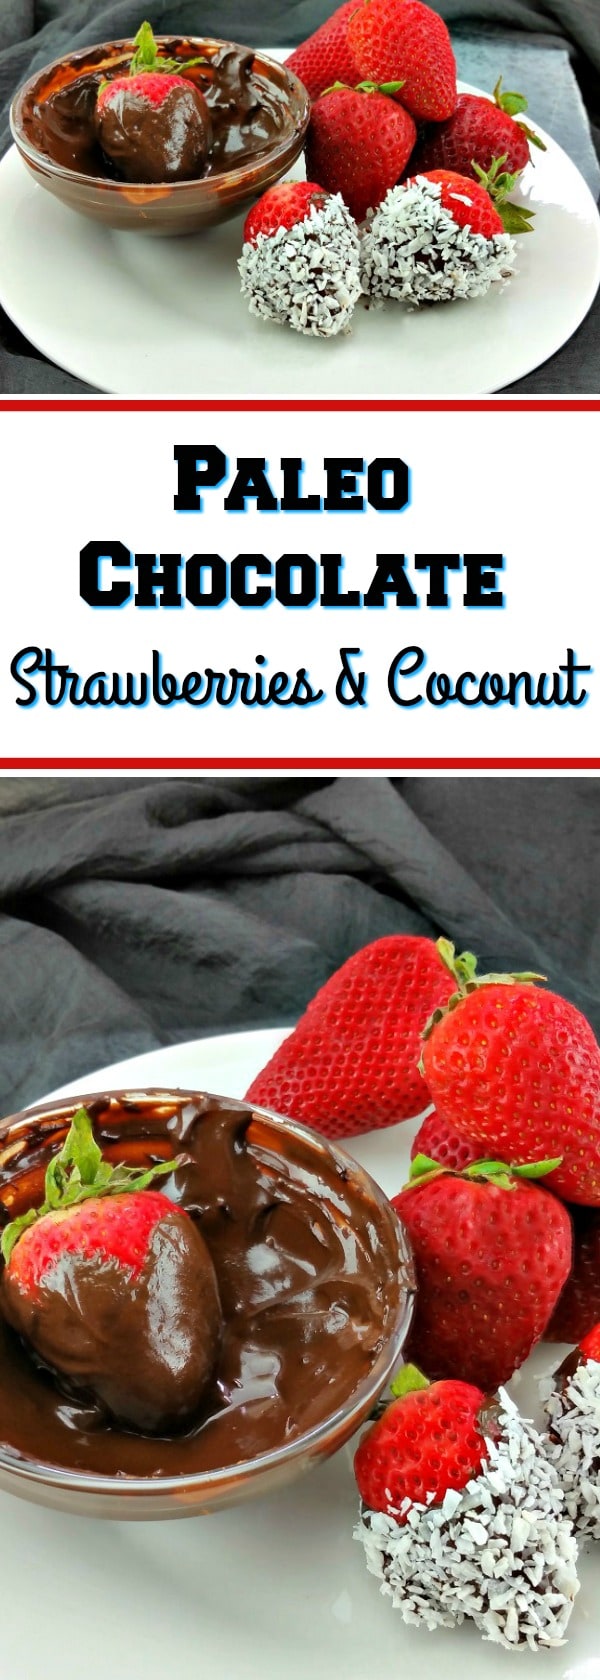 If you are eating Paleo and looking for a new treat to try, you will fall in love with this recipe. It is Paleo chocolate covered strawberries with coconut!